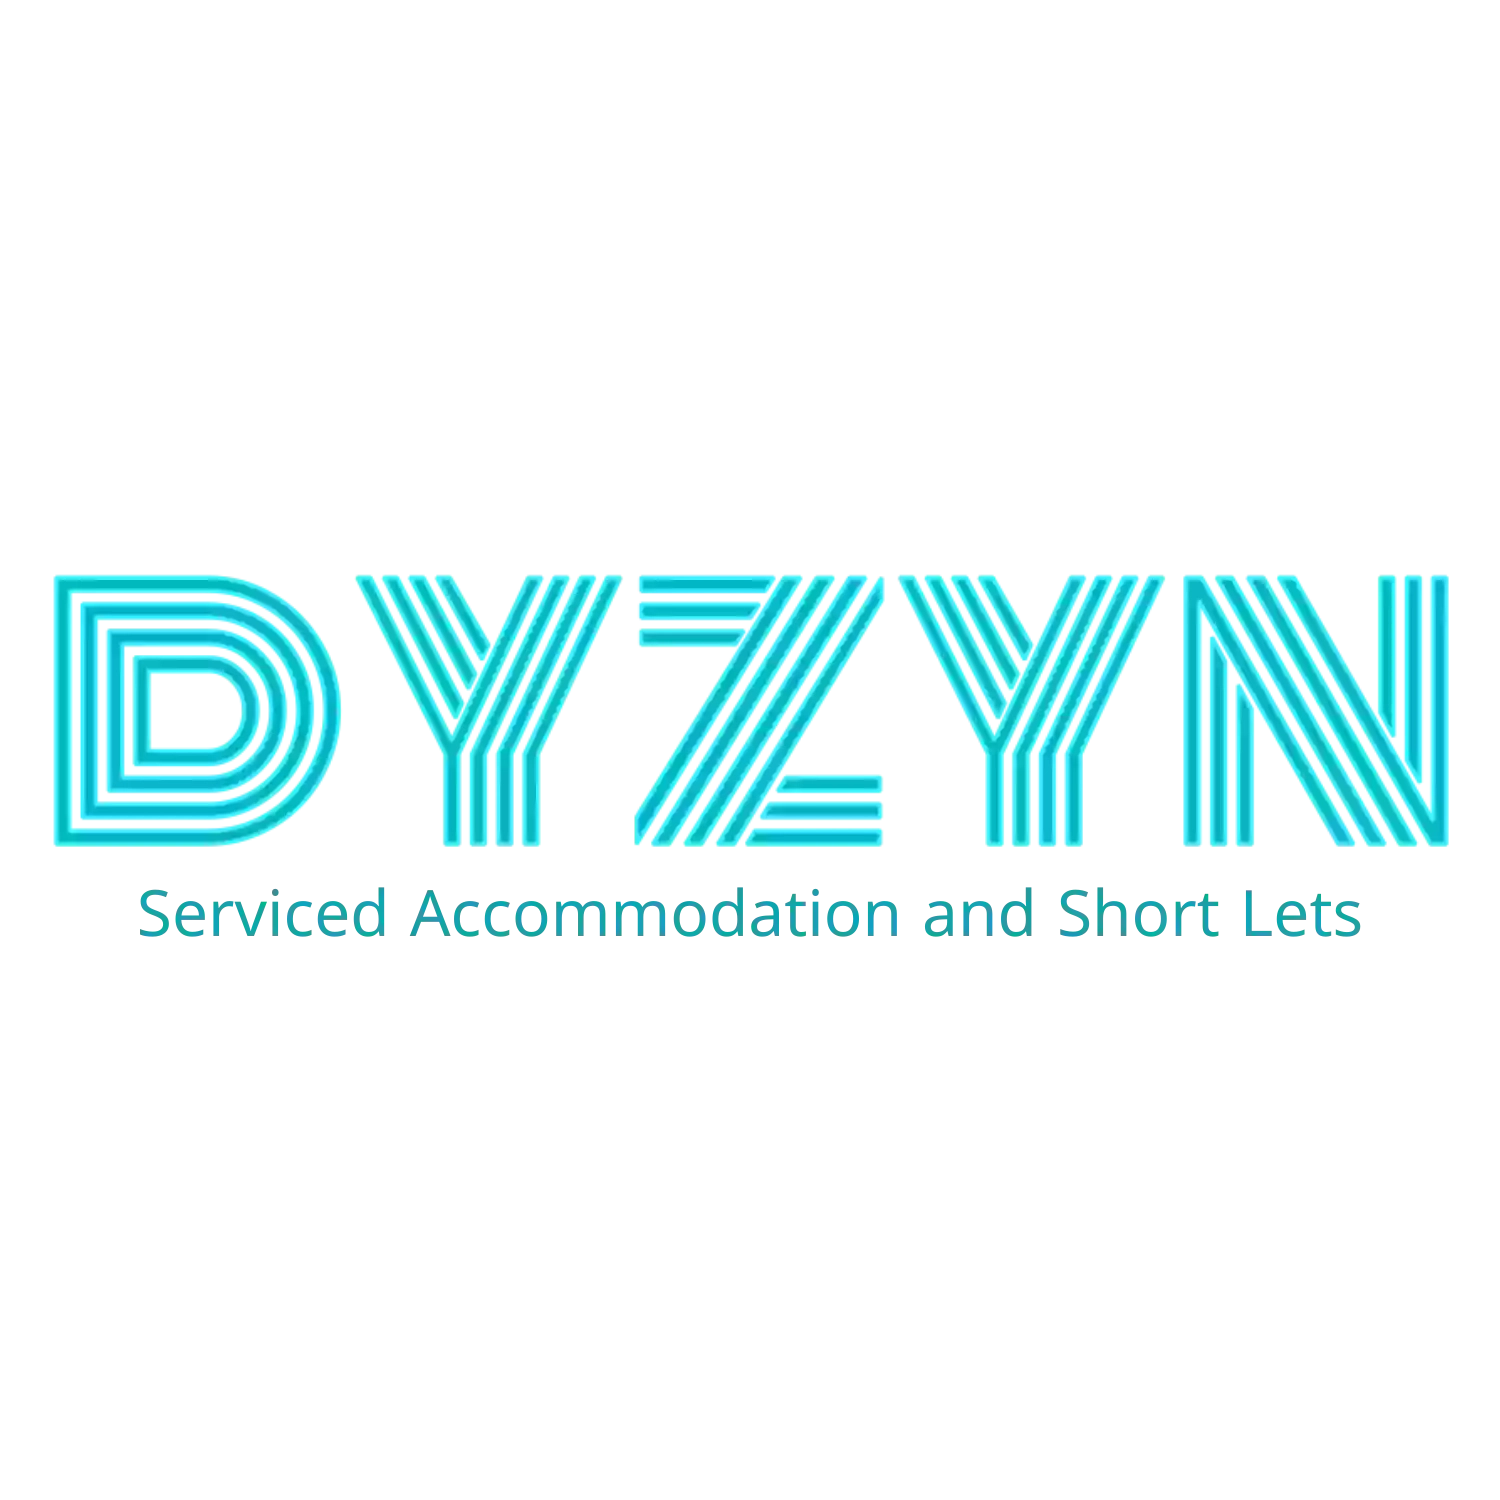 Taff Towers Serviced Accommodation and Short Lets By DYZYN Living